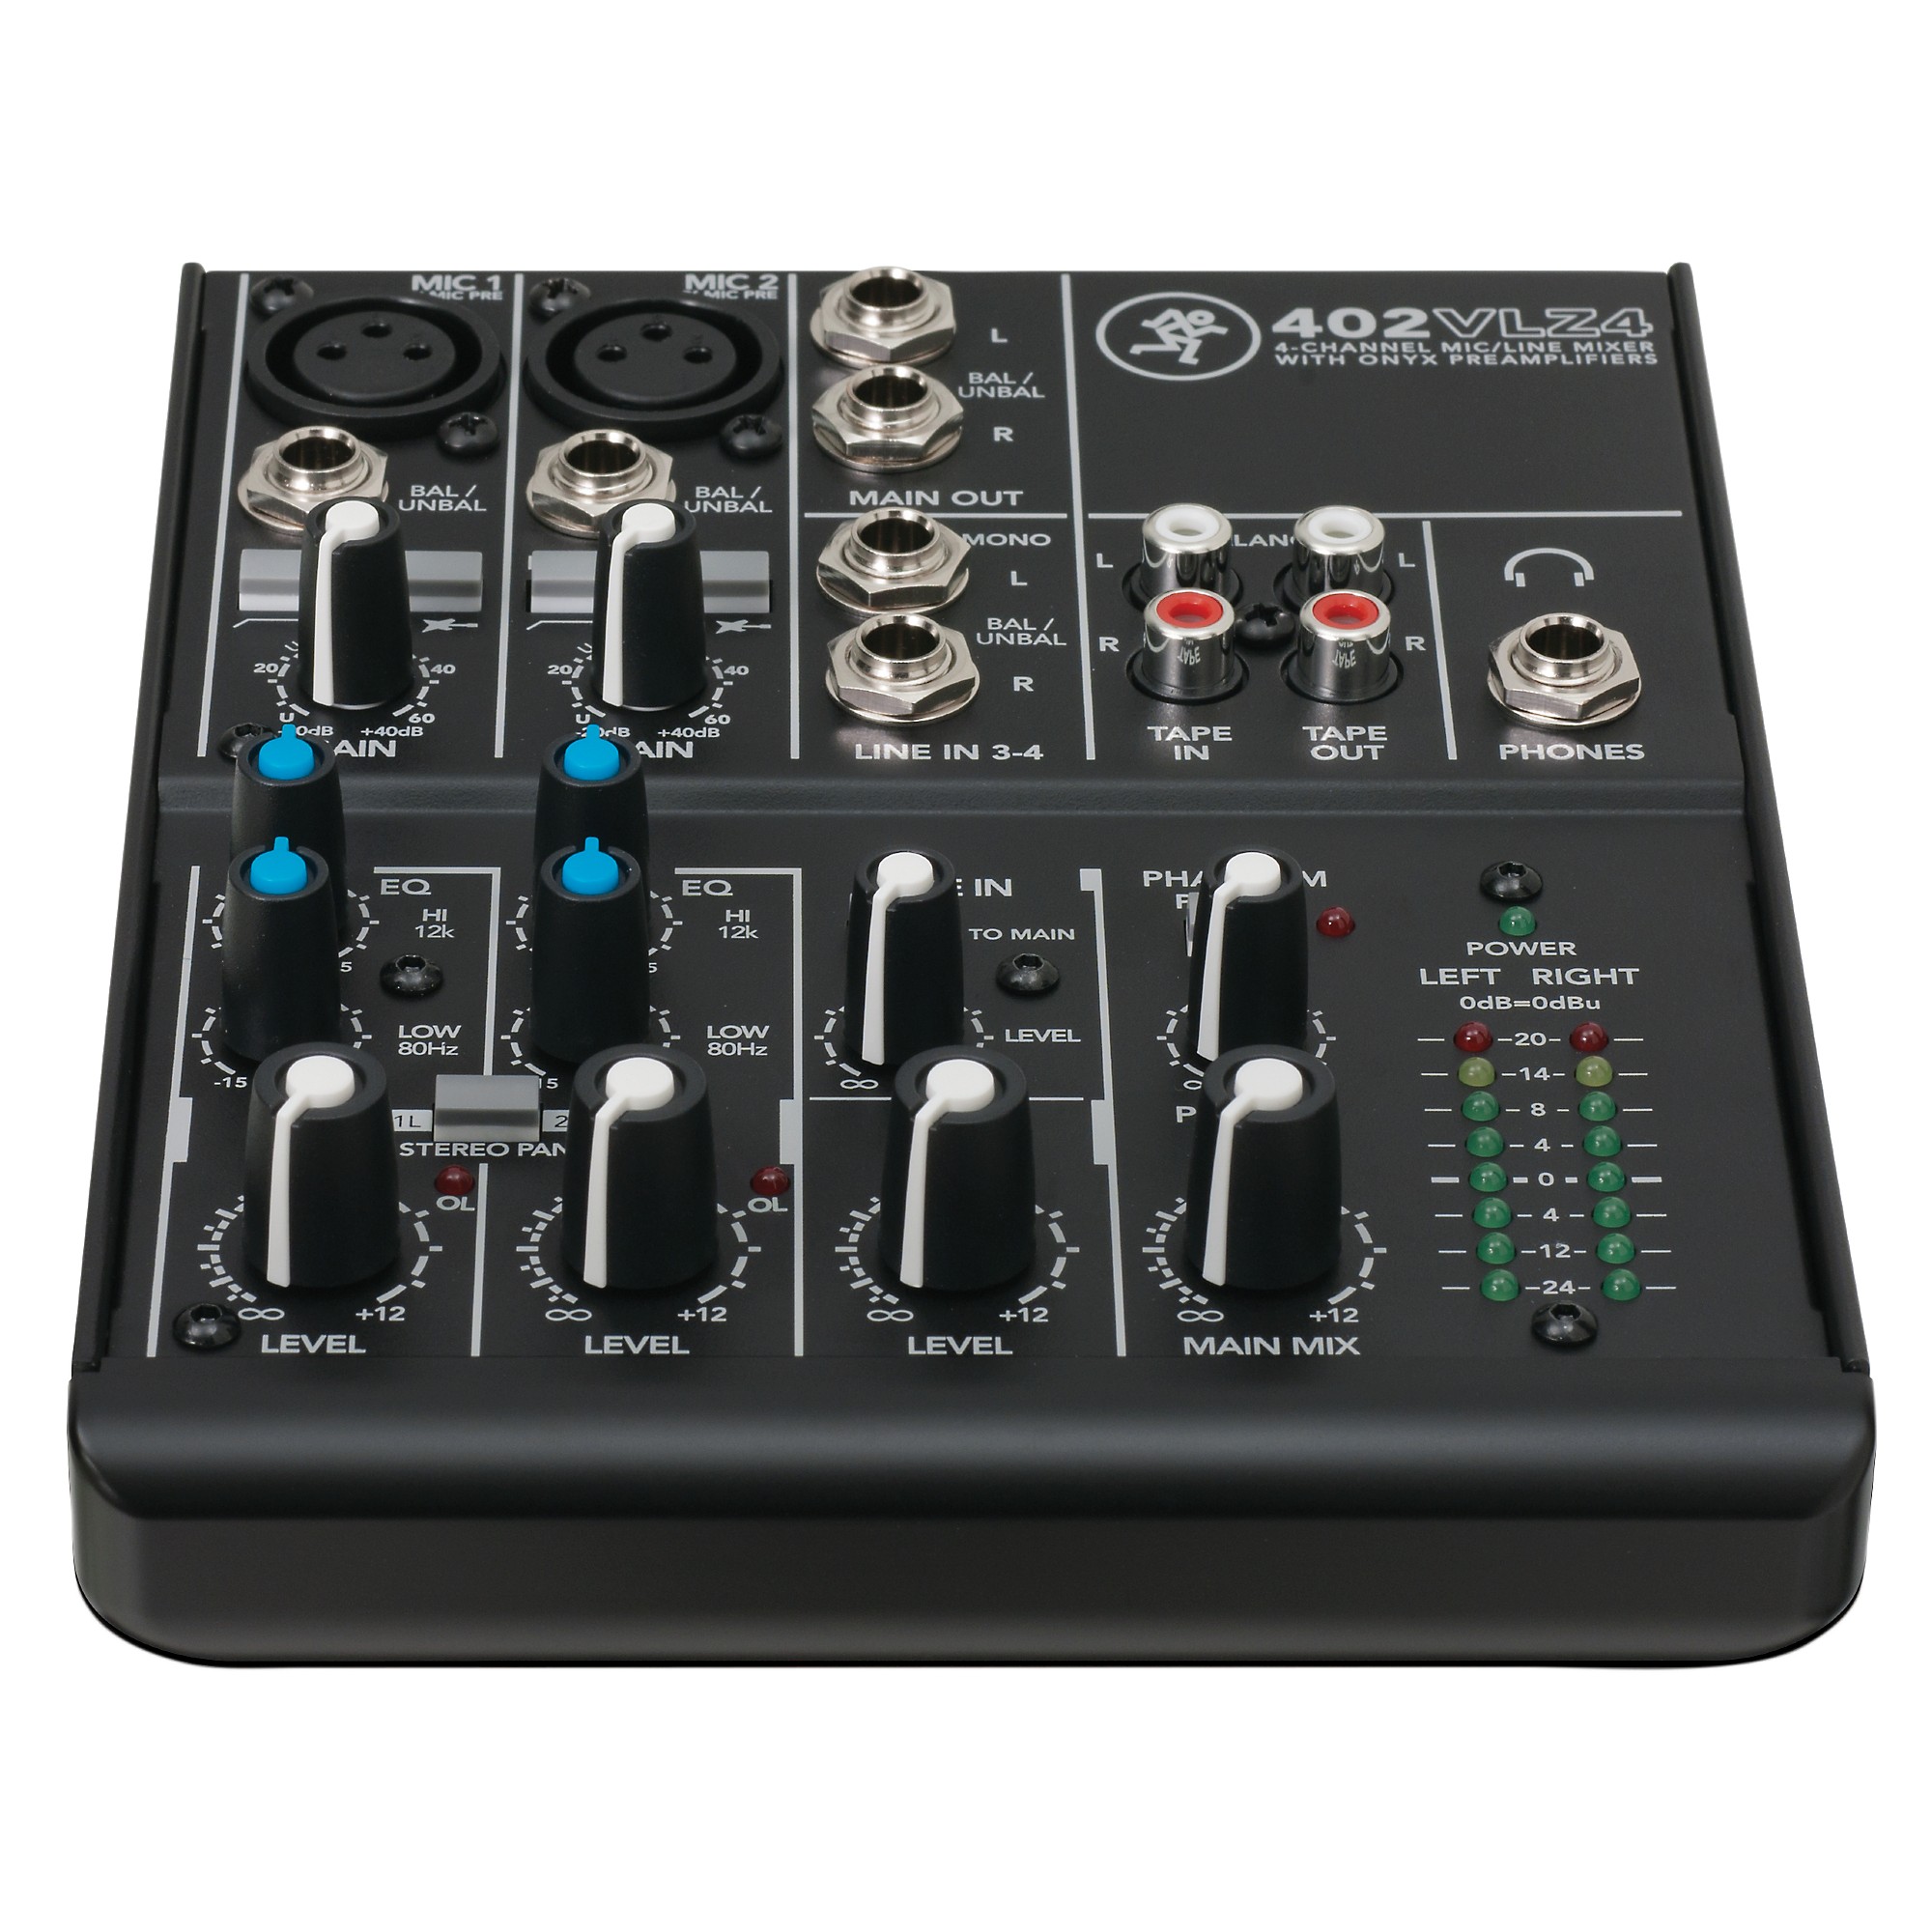 4-channel Ultra Compact Mixer with Mackie Mixer Bag Mackie 402VLZ4